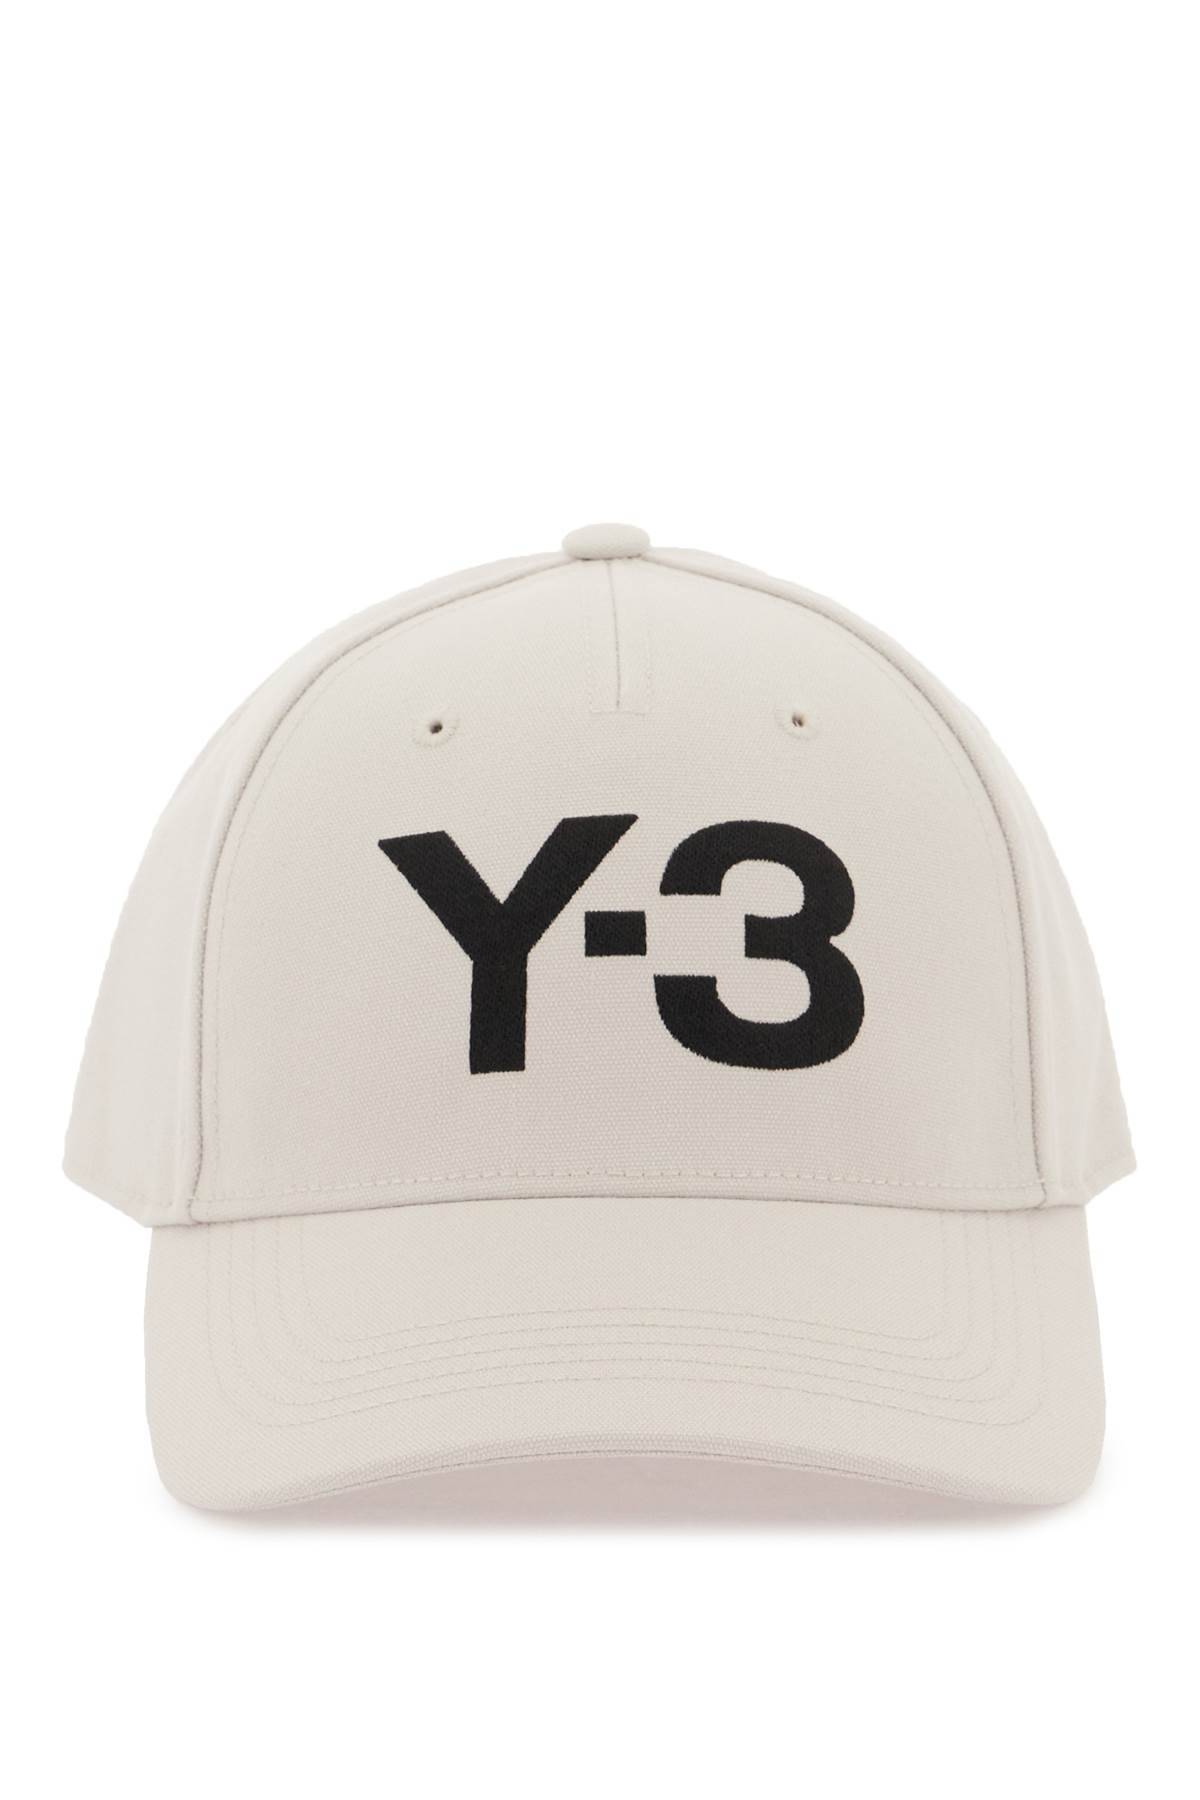 Y-3 Y-3 baseball cap with embroidered logo